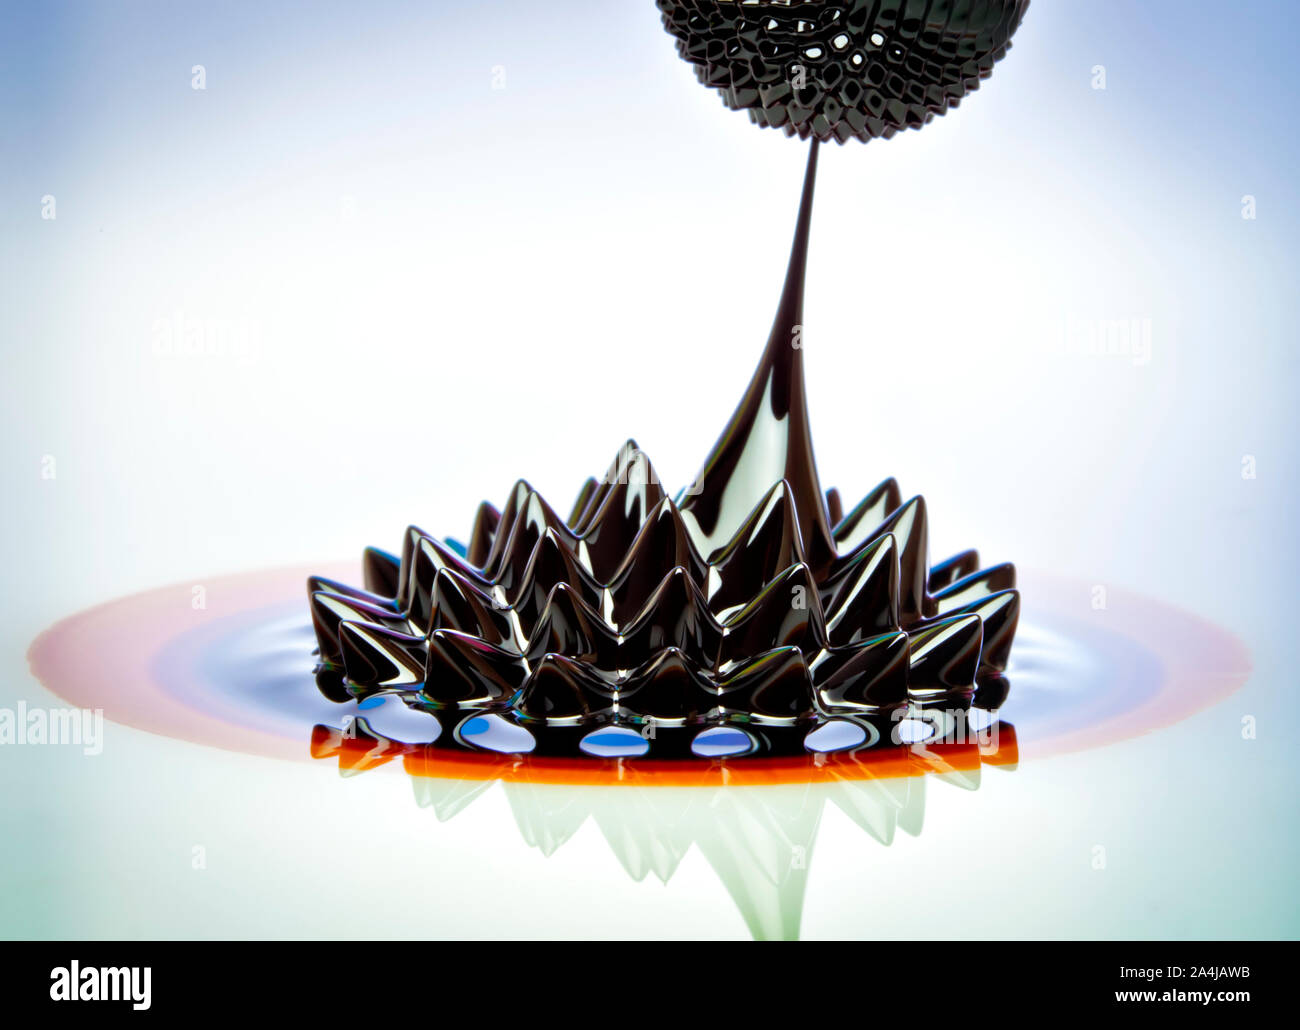 https://c8.alamy.com/comp/2A4JAWB/macro-photograph-of-ferrofluid-flowing-from-one-magnet-to-another-ferrofluid-is-a-colloidal-liquid-of-nanoscale-particles-in-a-carrier-fluid-that-bec-2A4JAWB.jpg